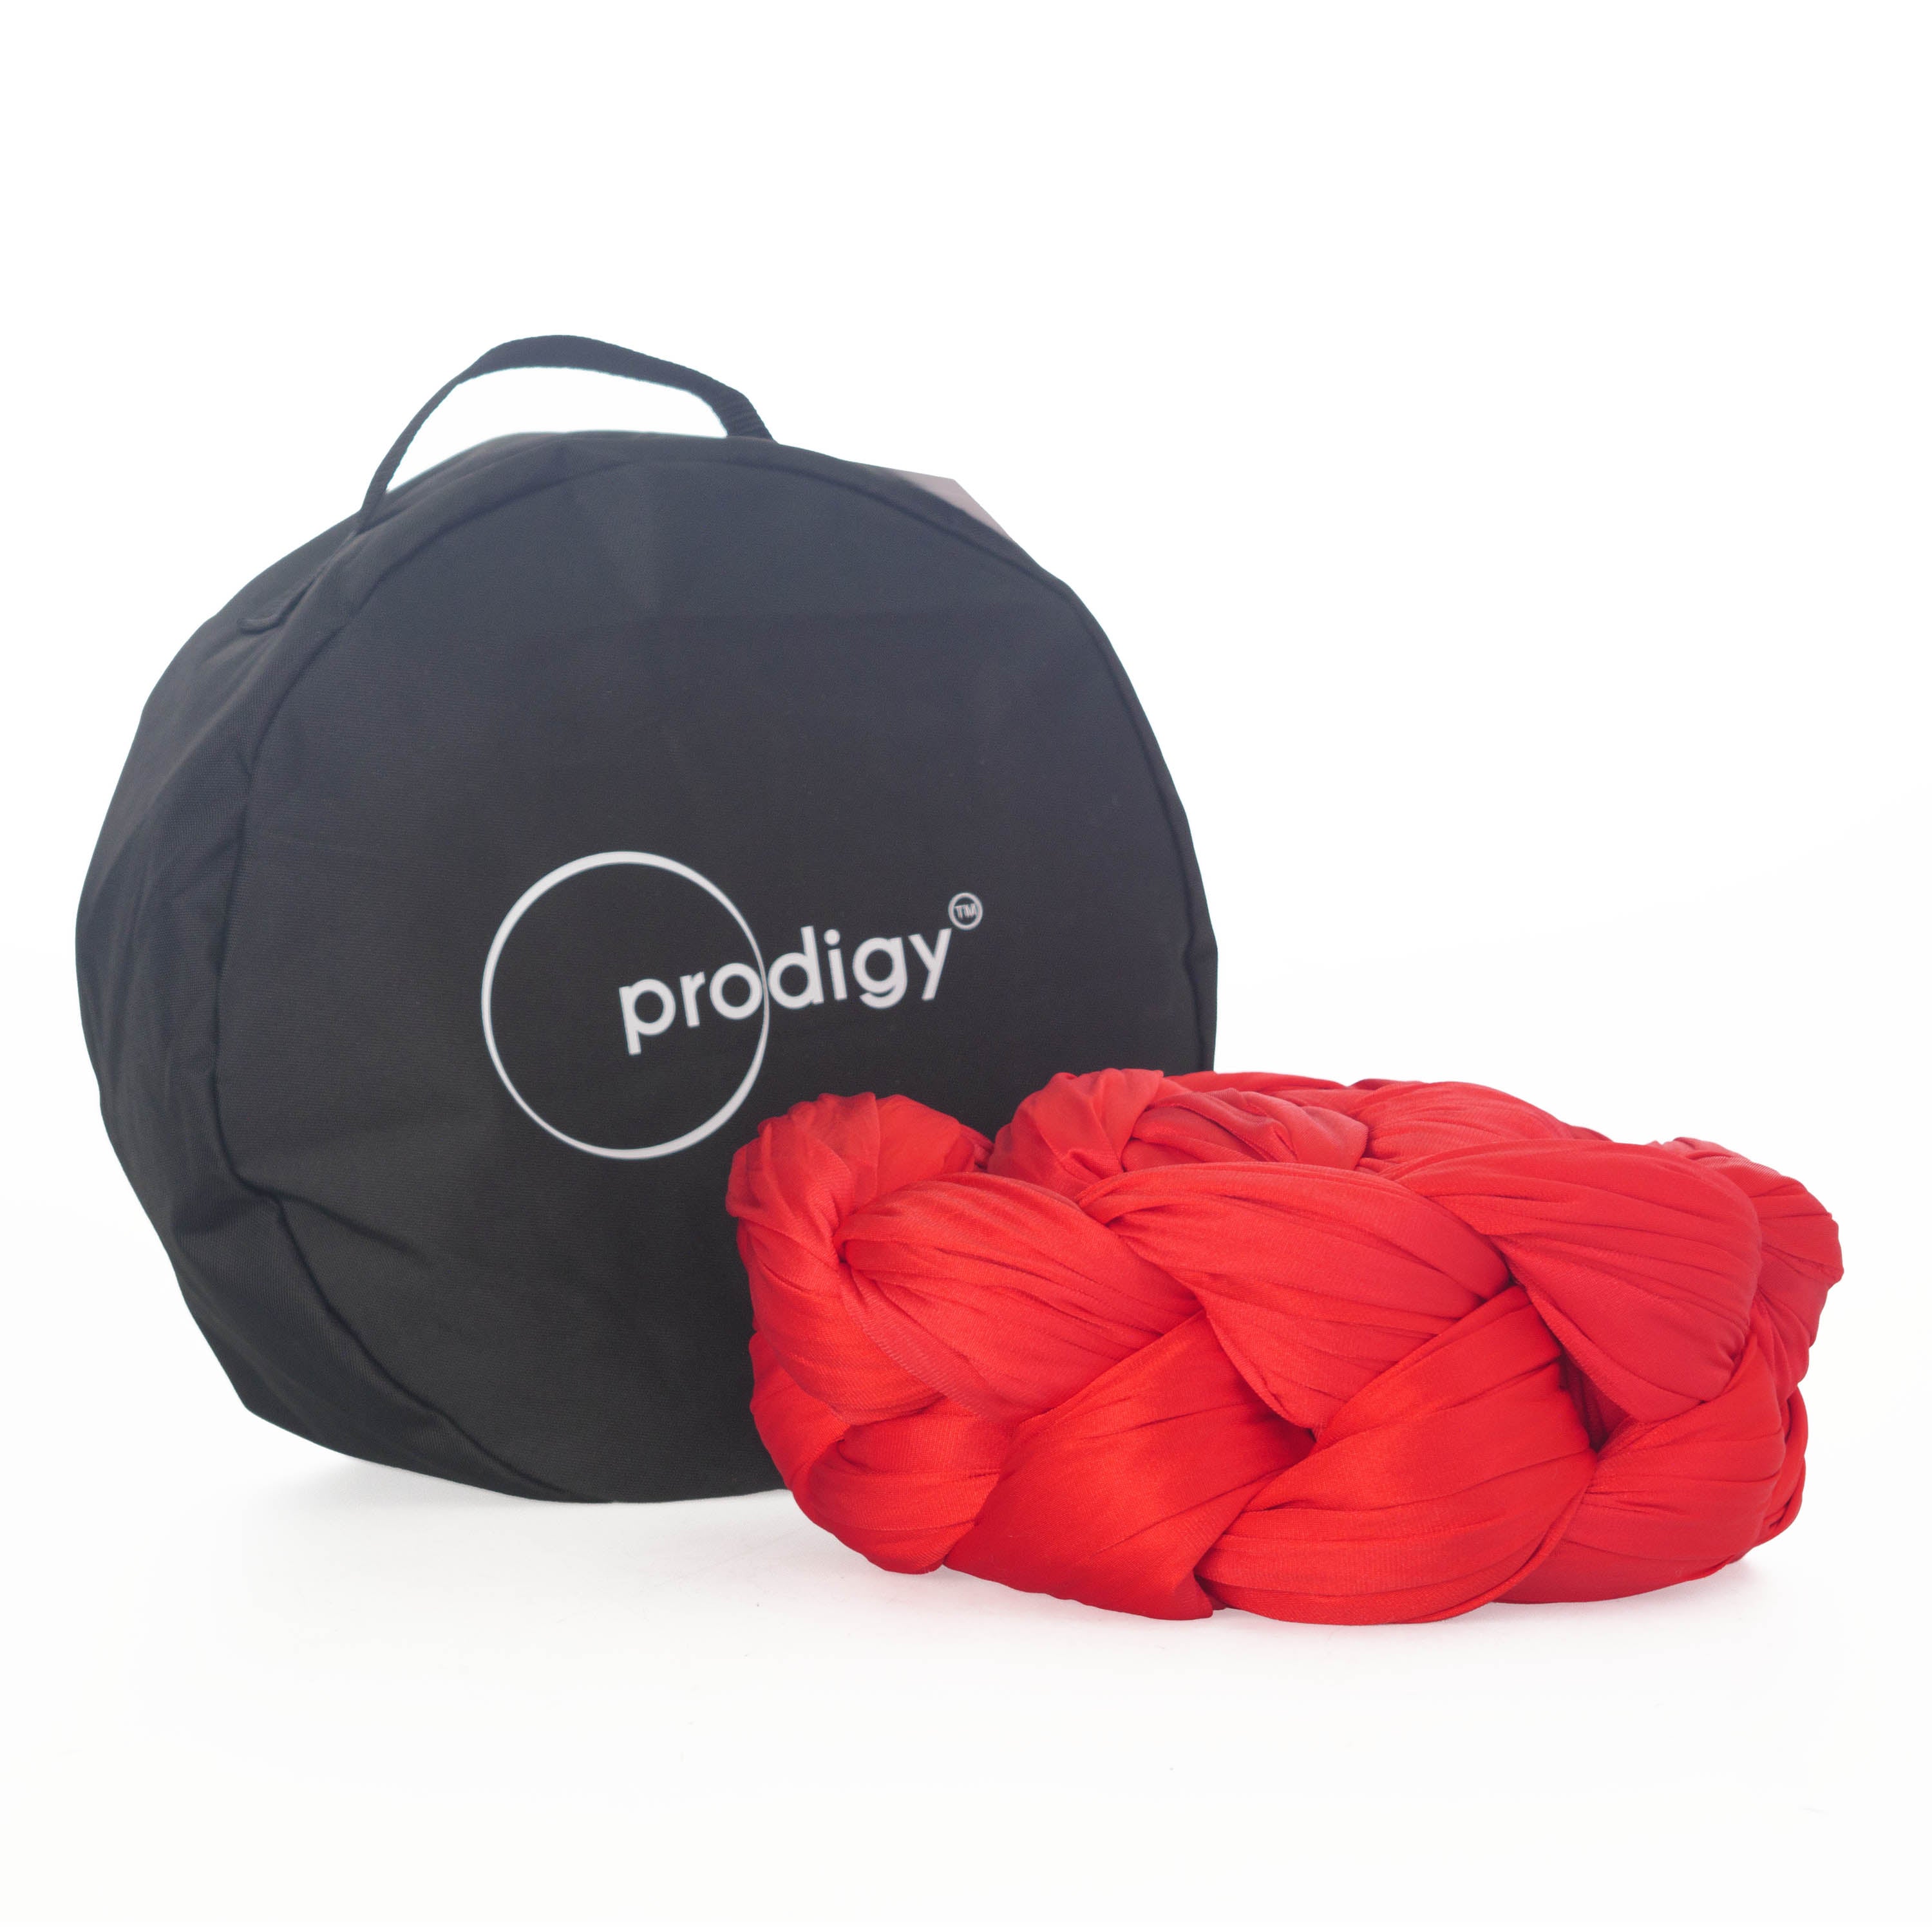 Red Prodigy hammock tied next to bag